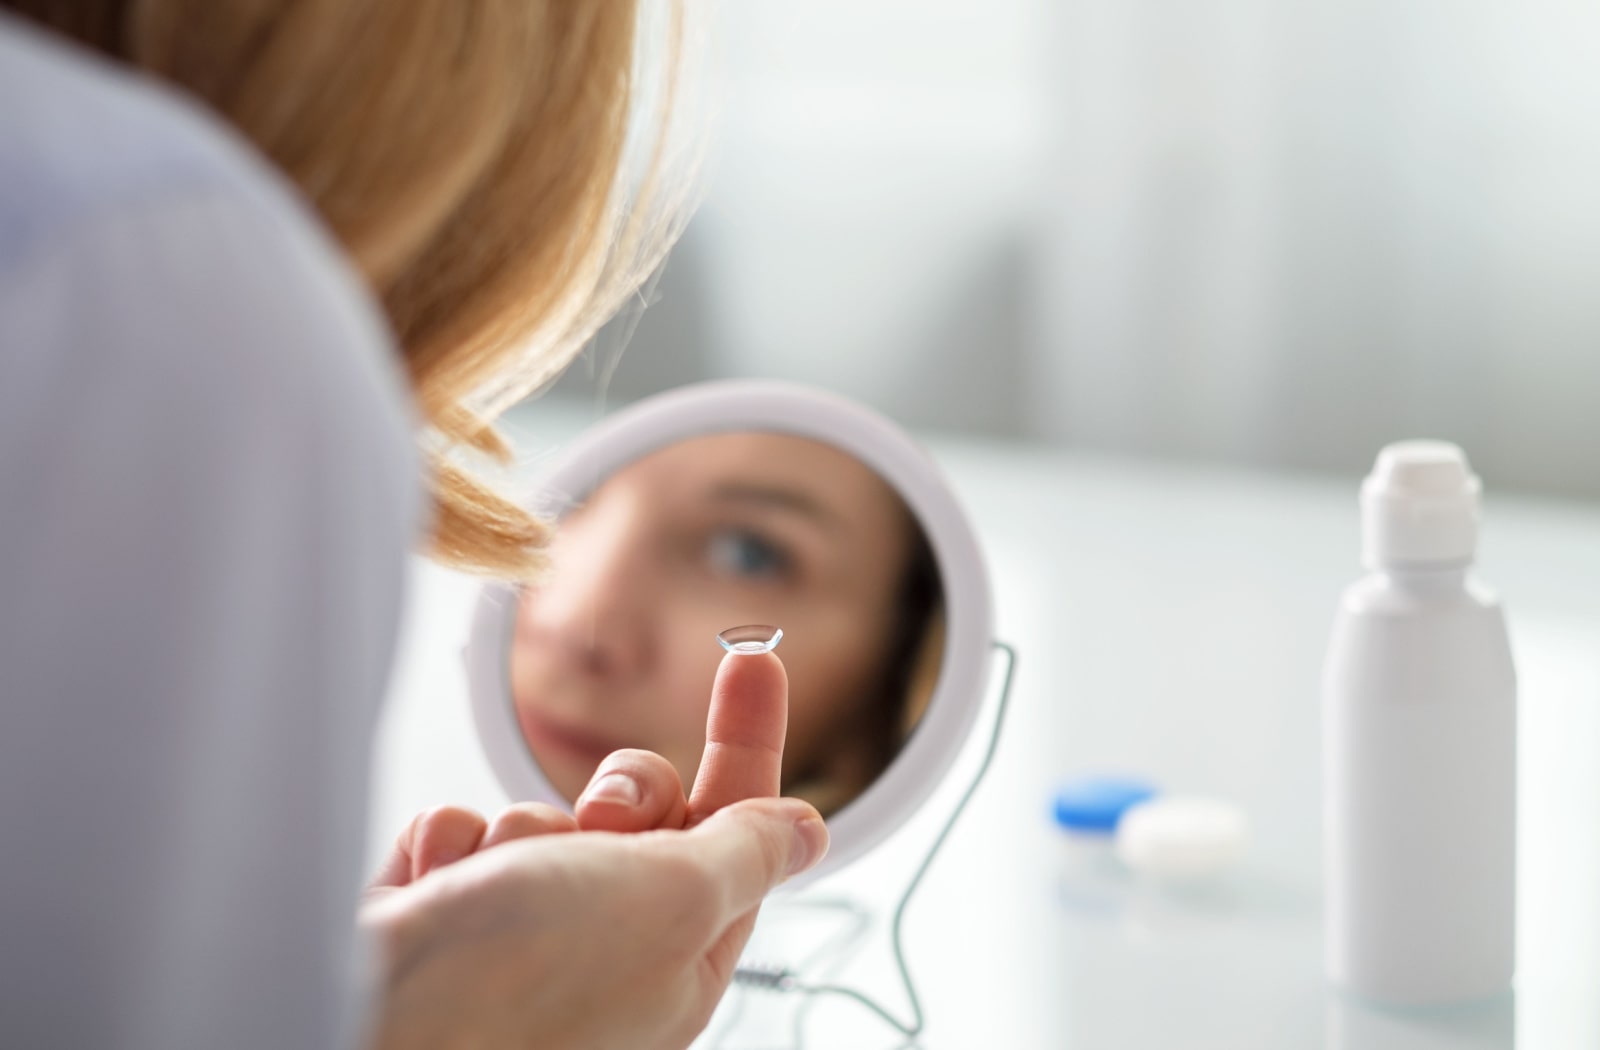 A young woman looking into a small mirror to put in her contact lens.